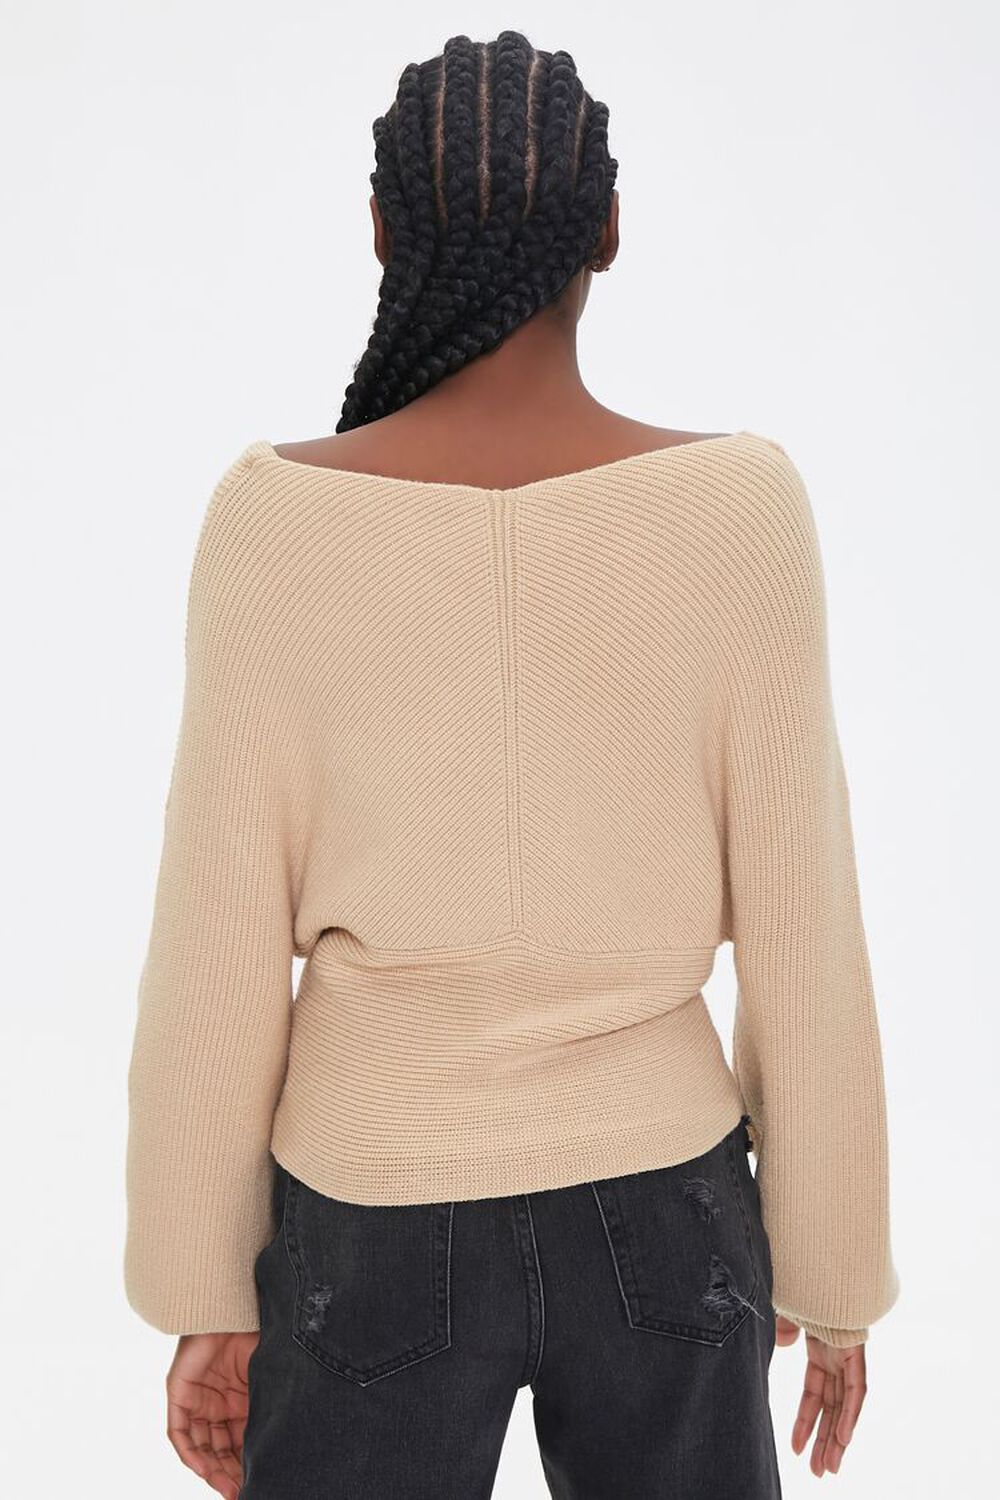 TAUPE Ribbed Crisscross-Front Sweater, image 3